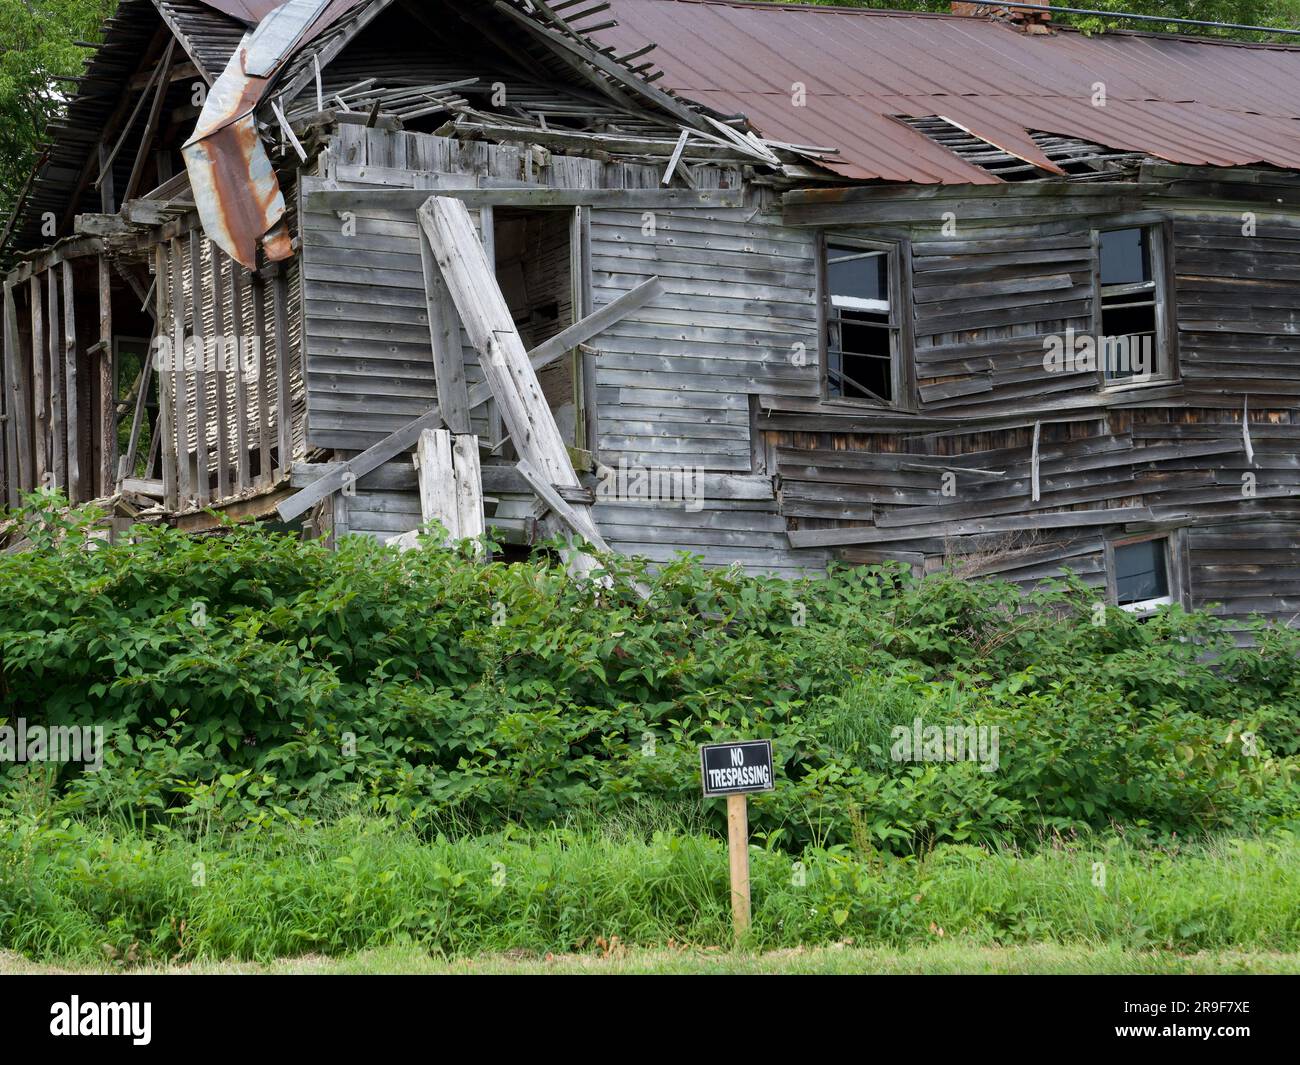 Decay and abandonment tell the story of forgotten history. A dilapidated wooden building, its collapsing structure marked with a 'No Trespassing' sign Stock Photo